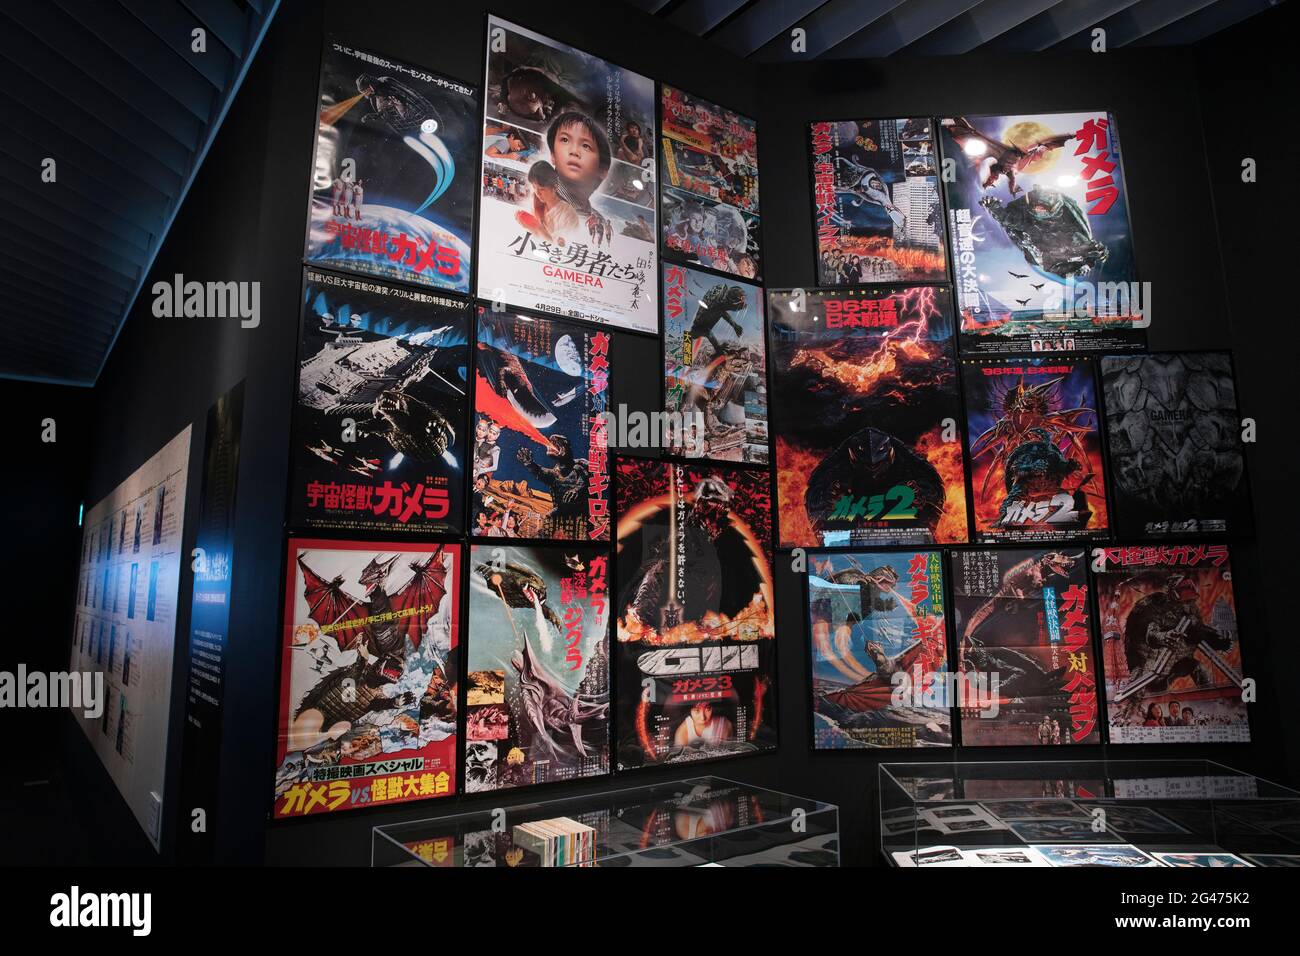 A display of Japanese movie posters Stock Photo